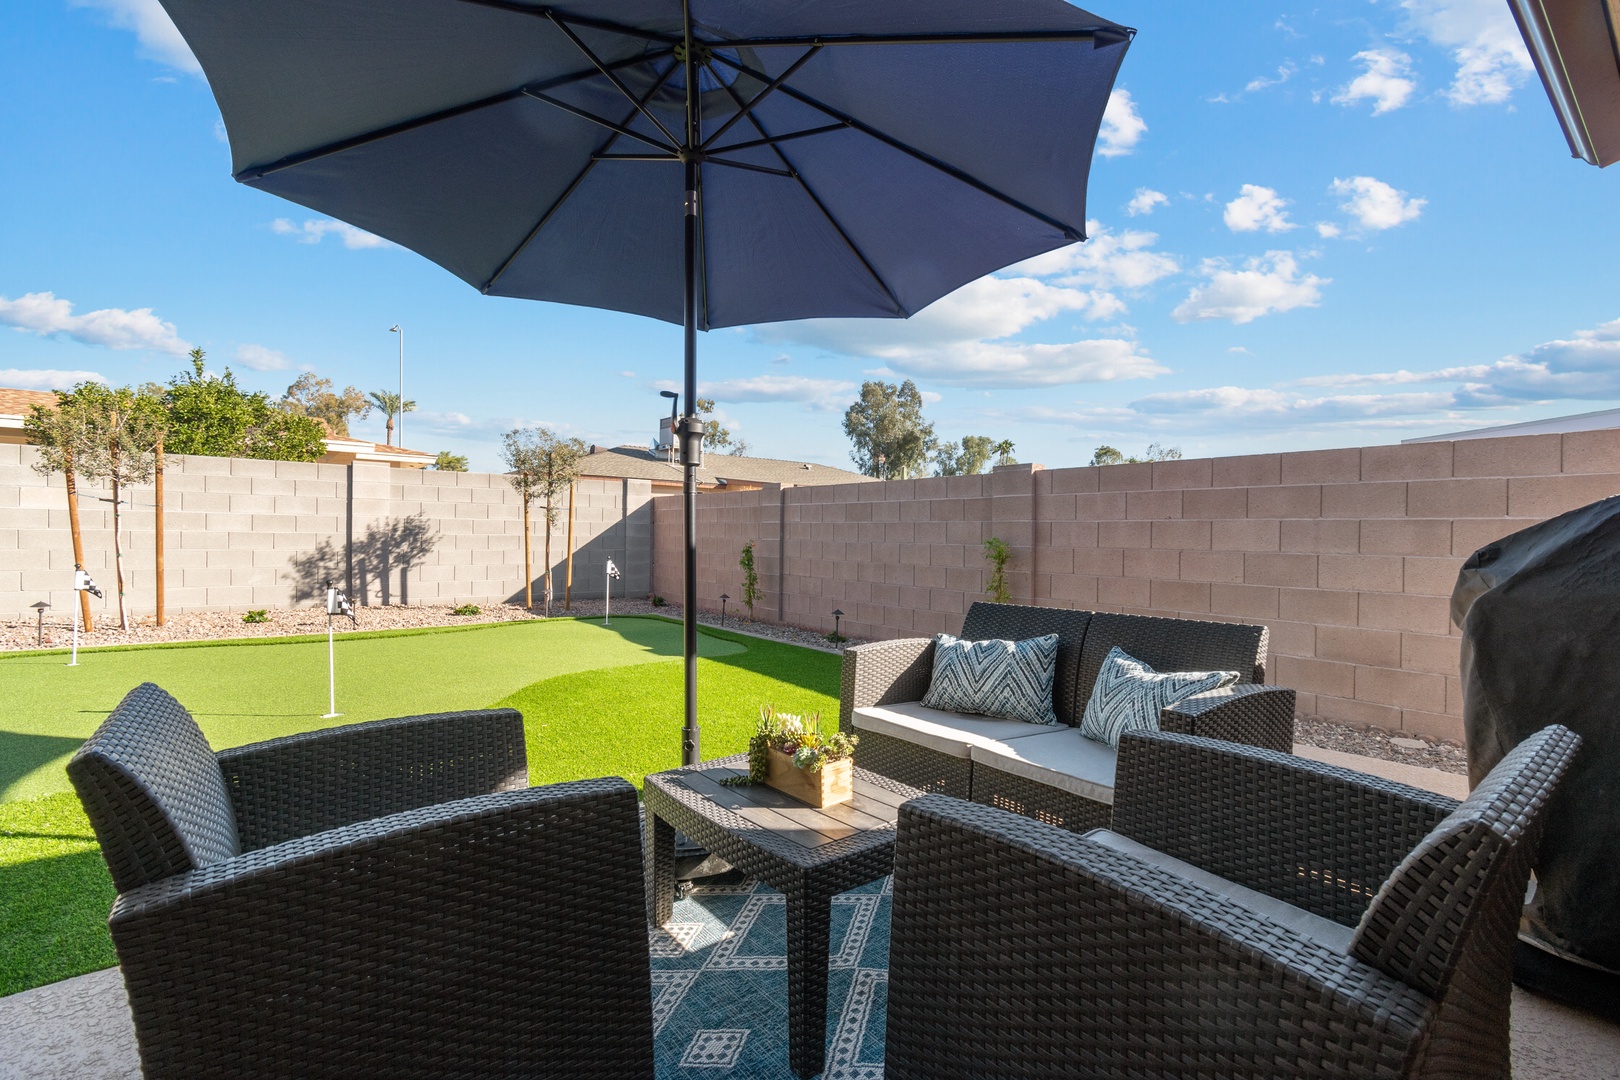 Mesa Vacation Rentals, Private Putting Oasis - Picture yourself with a drink and a book on this lovely patio